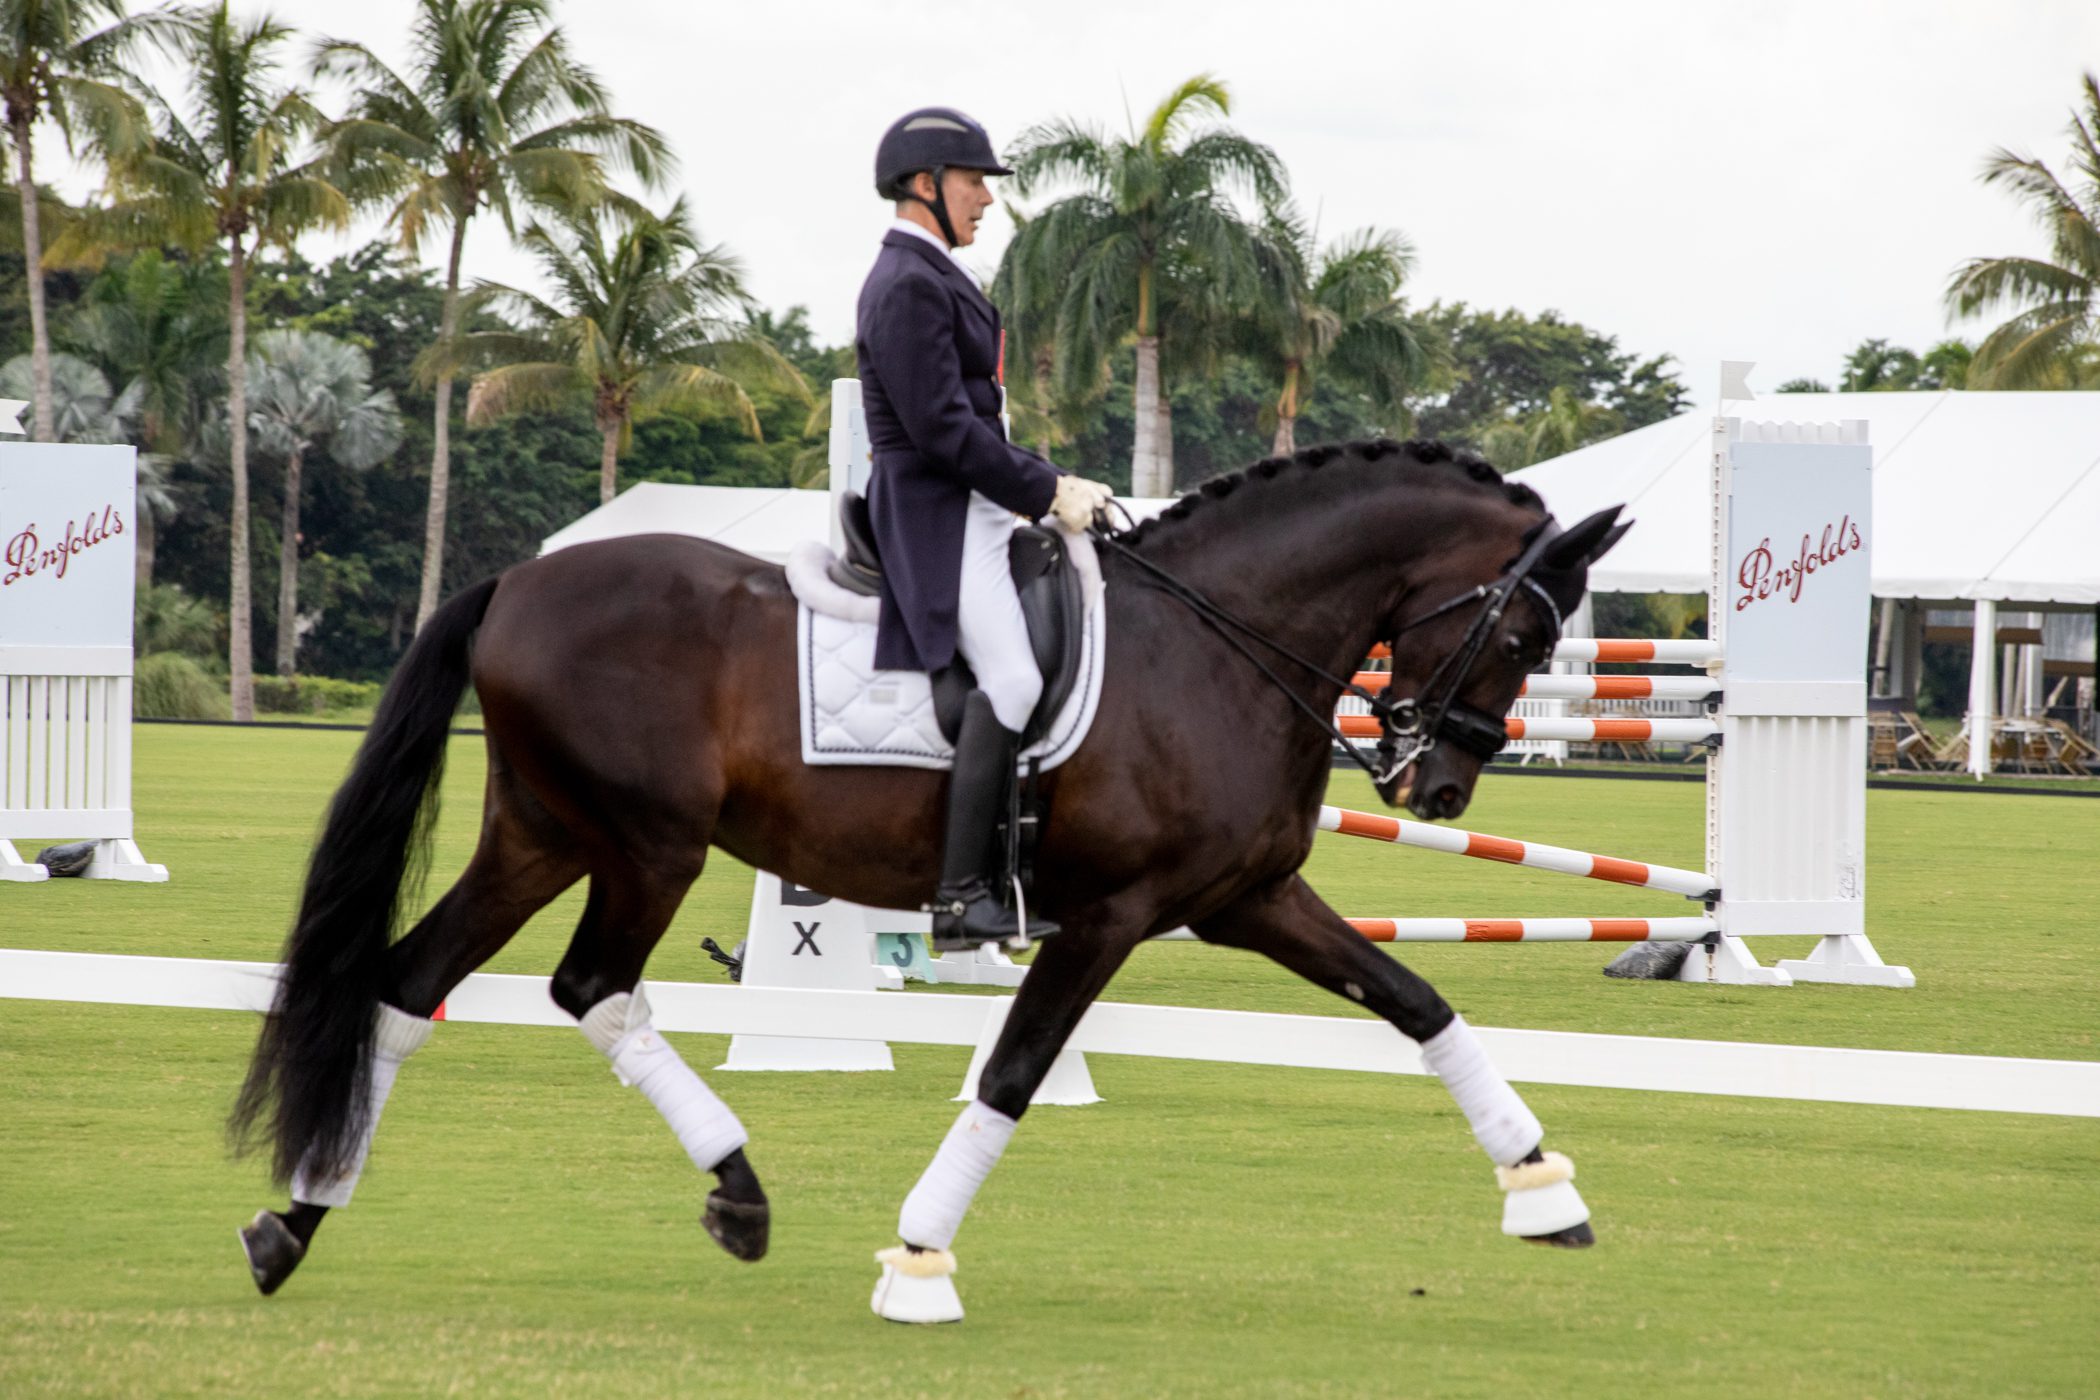 Dressage demonstration at the Equestrian Legends event for The Buoniconti Fund in Wellington Florida